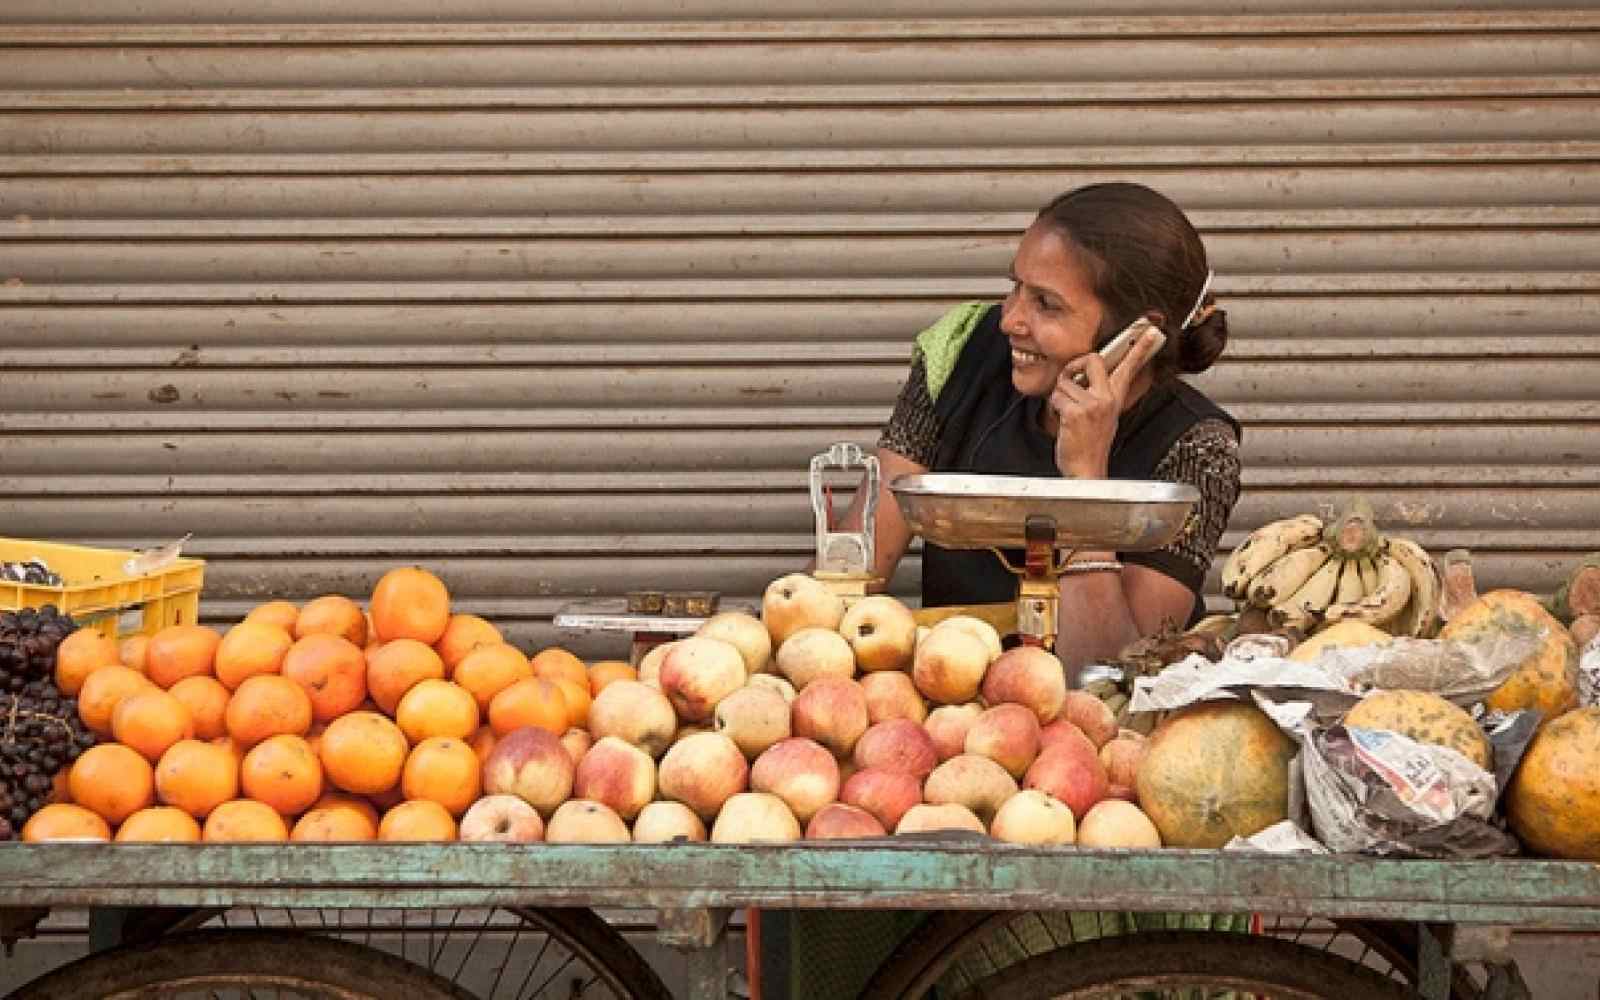 Grameen Foundation’s Mobile Microfranchising initiative